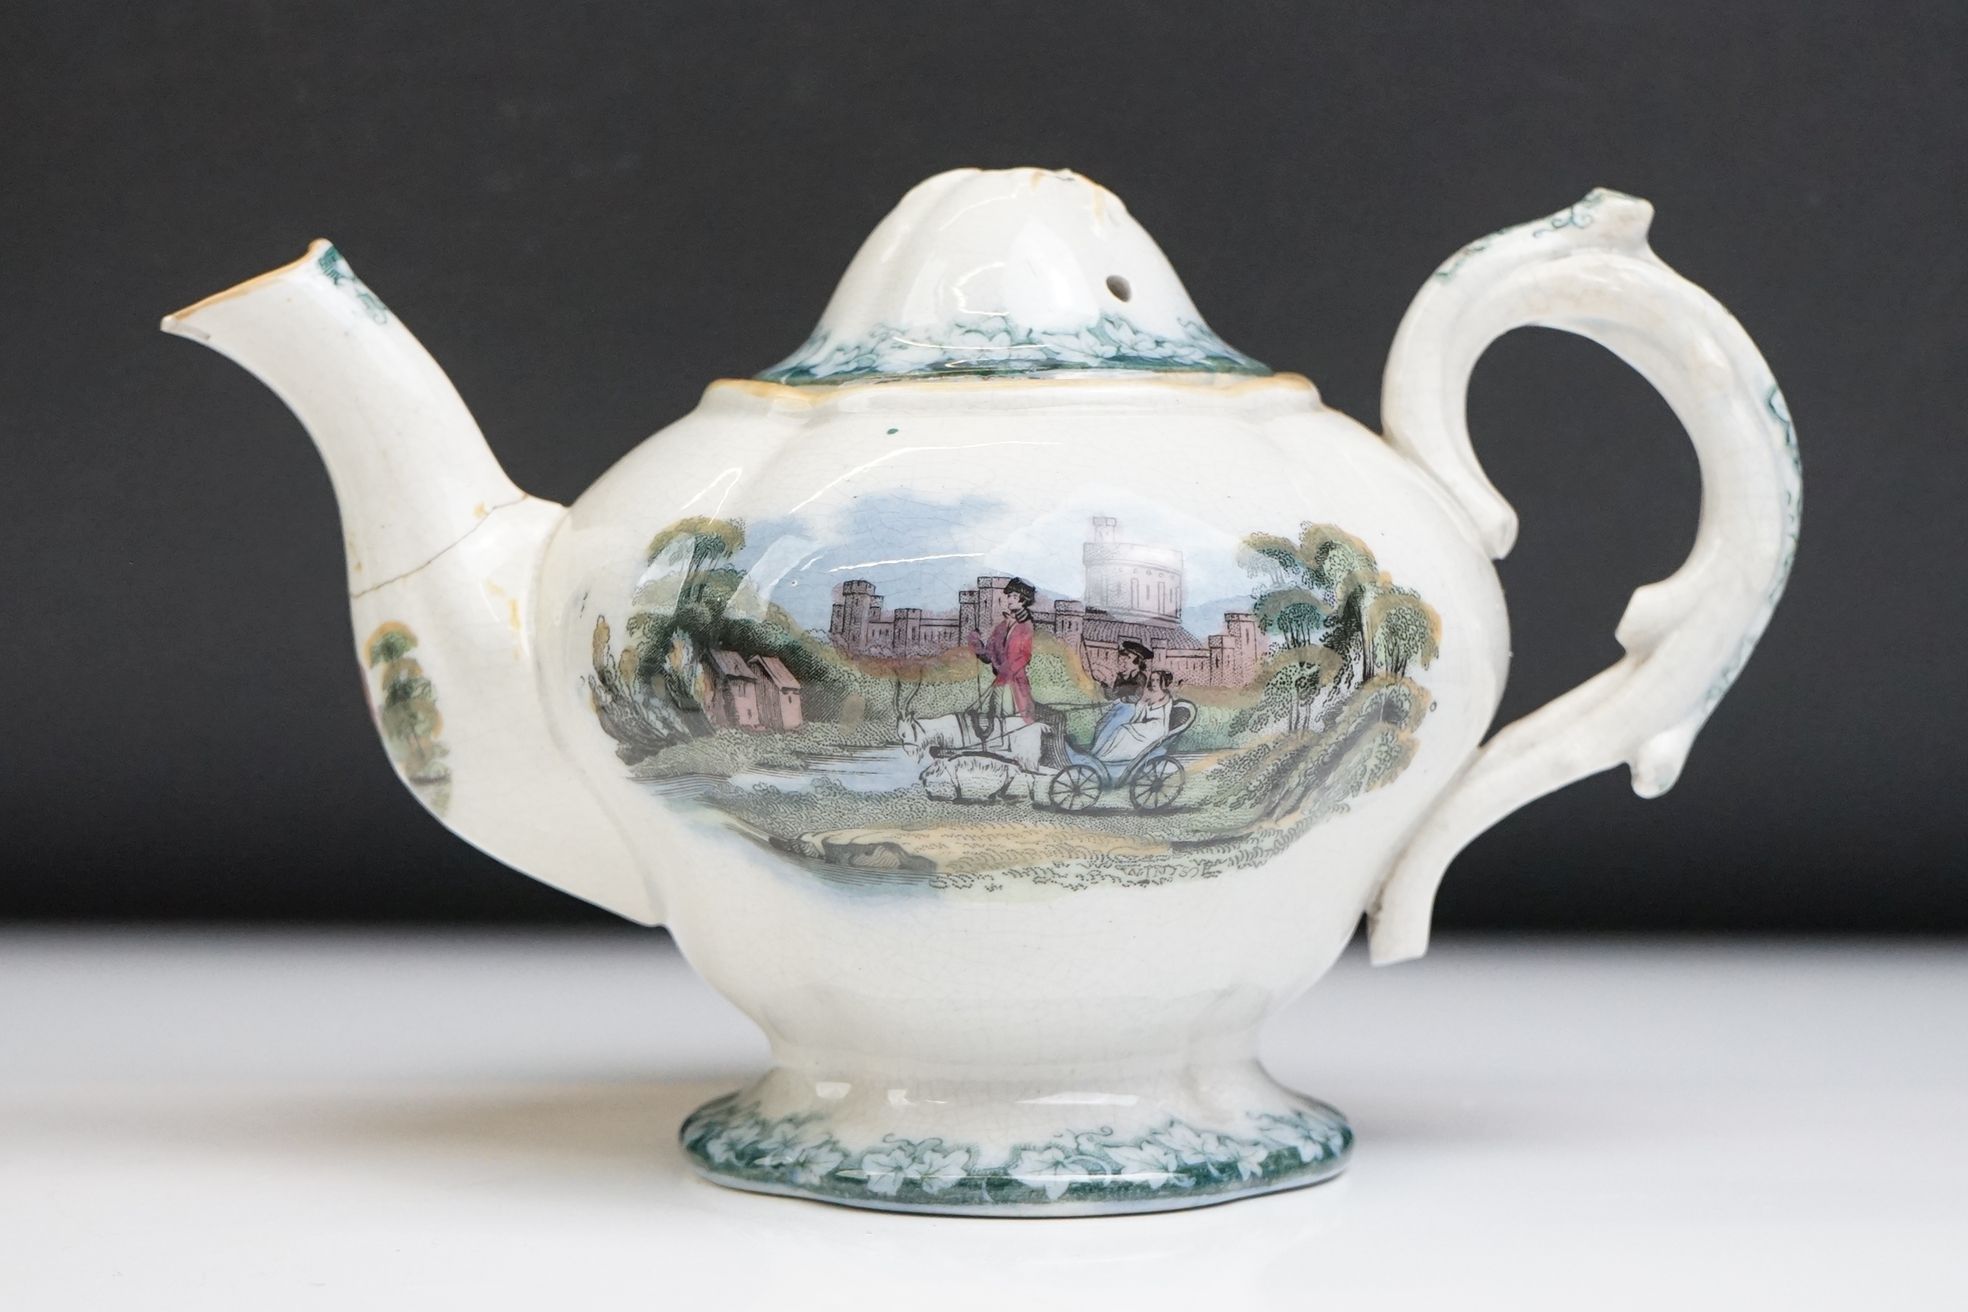 19th century Staffordshire Pottery Child's part Tea Set with transfer decoration of a goat pulling a - Image 2 of 10